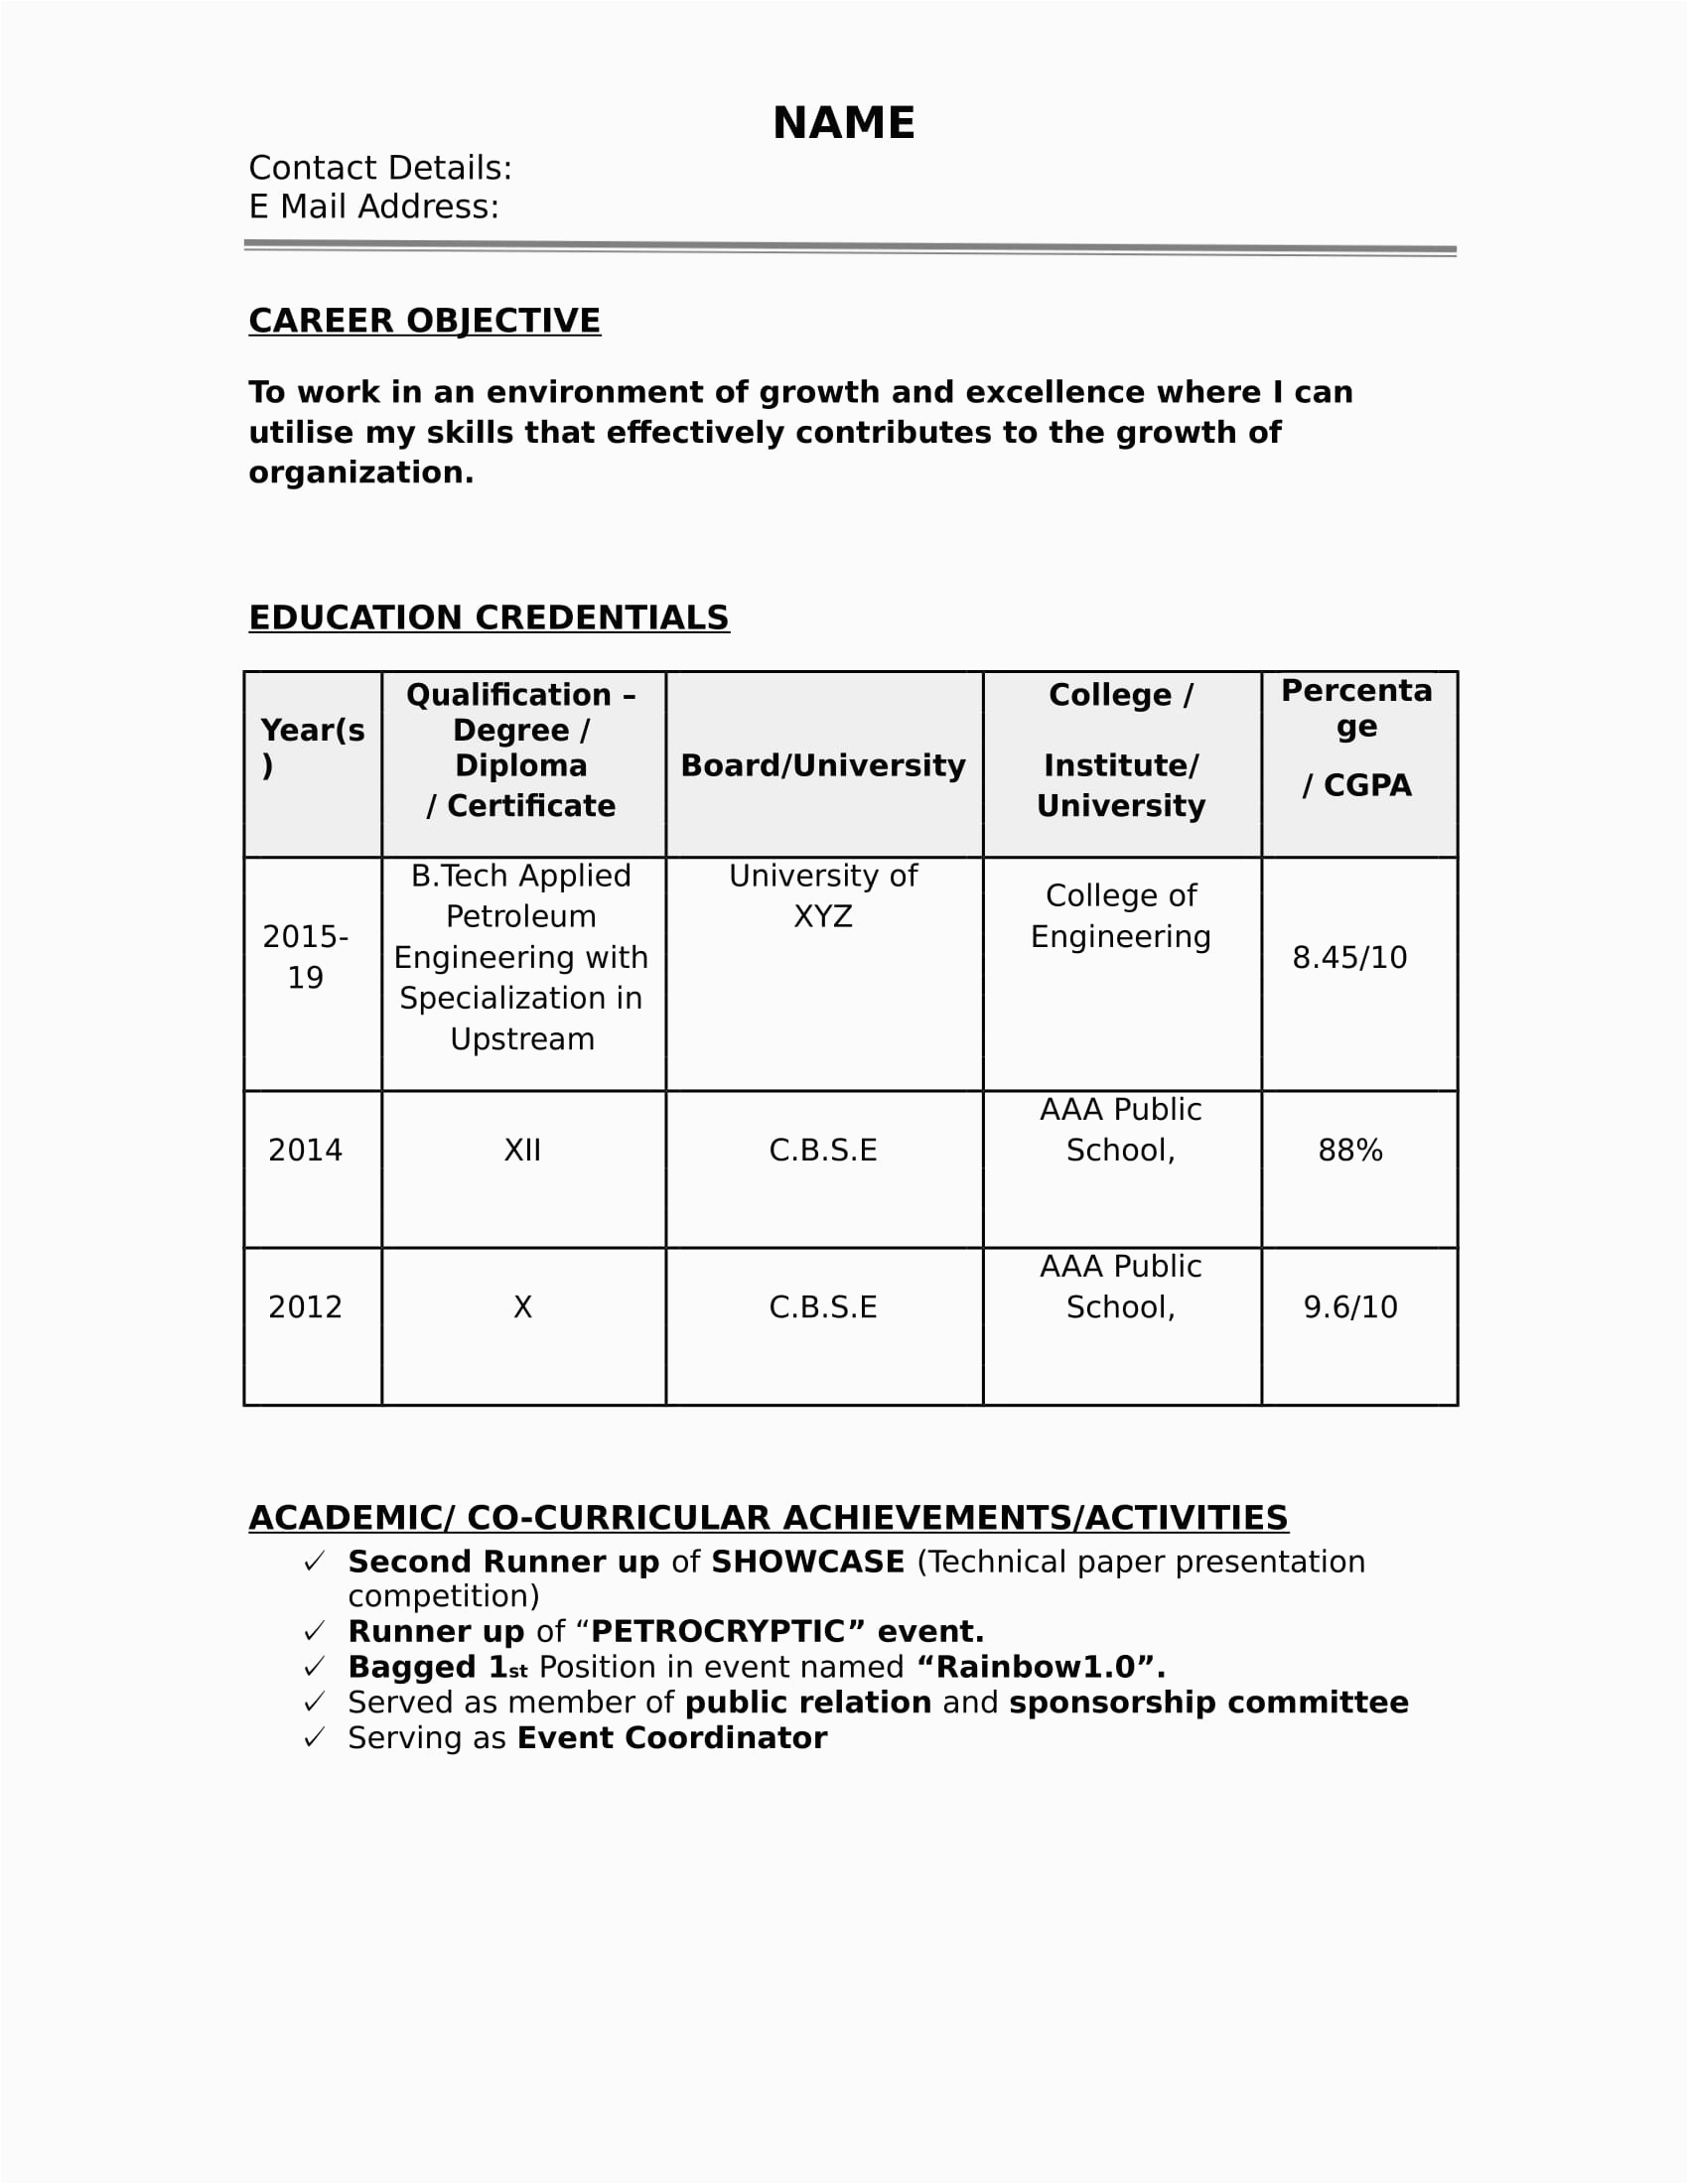 Resume Template Download for Engineering Freshers Resume formats for 2020